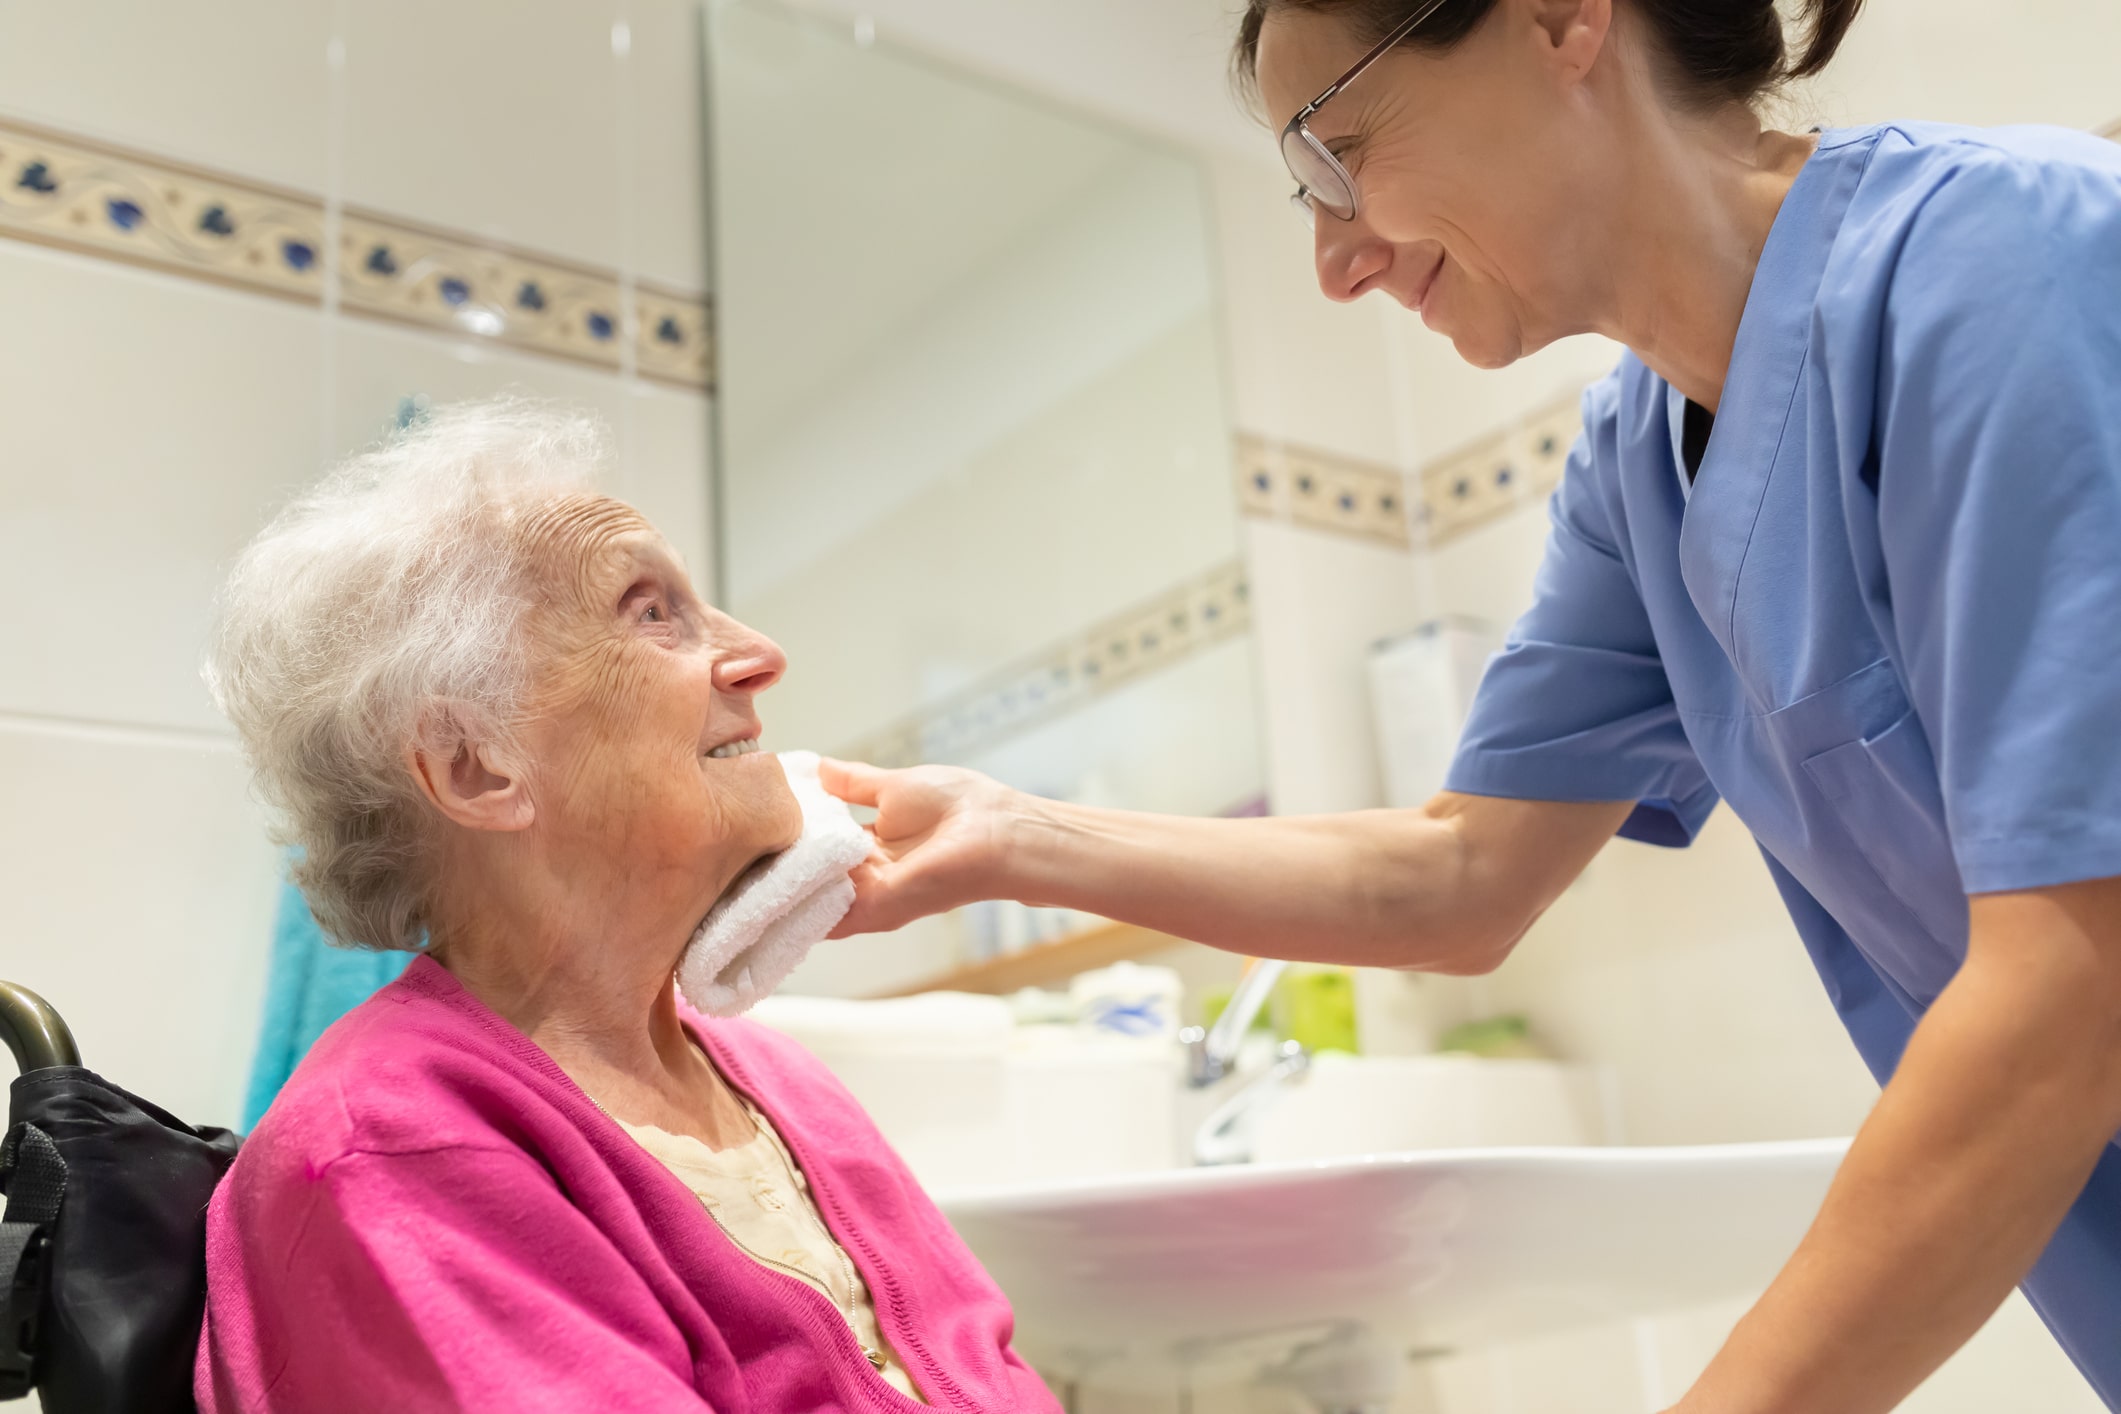 Nurse helping a patient clean face with a white towel